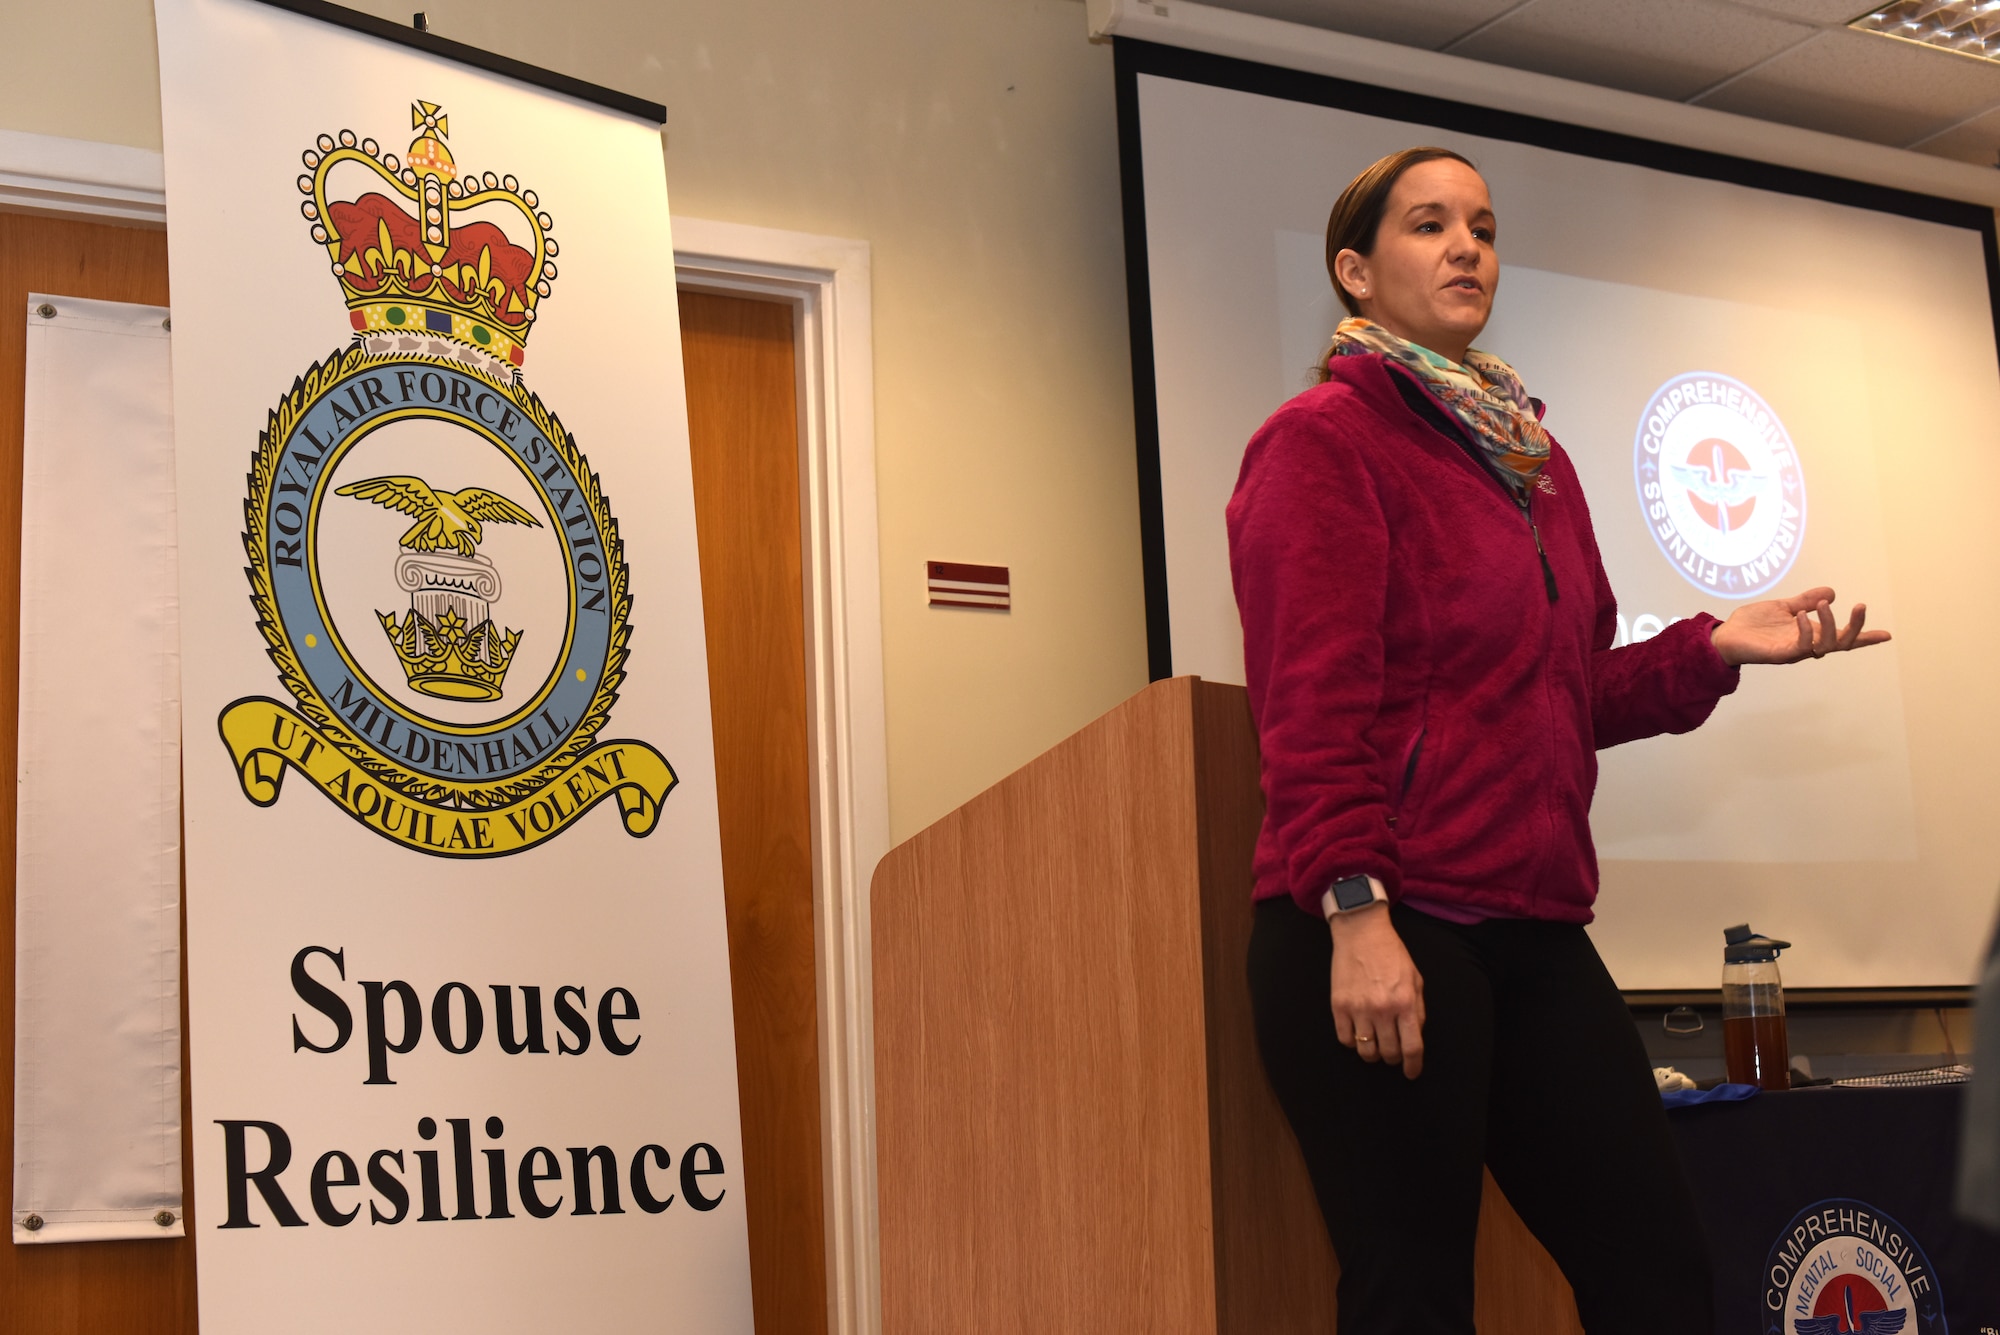 Stephanie Lindner, Master Resiliency Trainer, speaks during a Mindfulness presentation at RAF Mildenhall, England, Jan. 10, 2019. Lindner, Catarina Wyatt and Ryann Paul led the training with a discussion on mindfulness and resiliency and took Team Mildenhall spouses at a local yoga studio for a Restorative Yoga session. (U.S. Air Force photo by Airman 1st Class Brandon Esau)